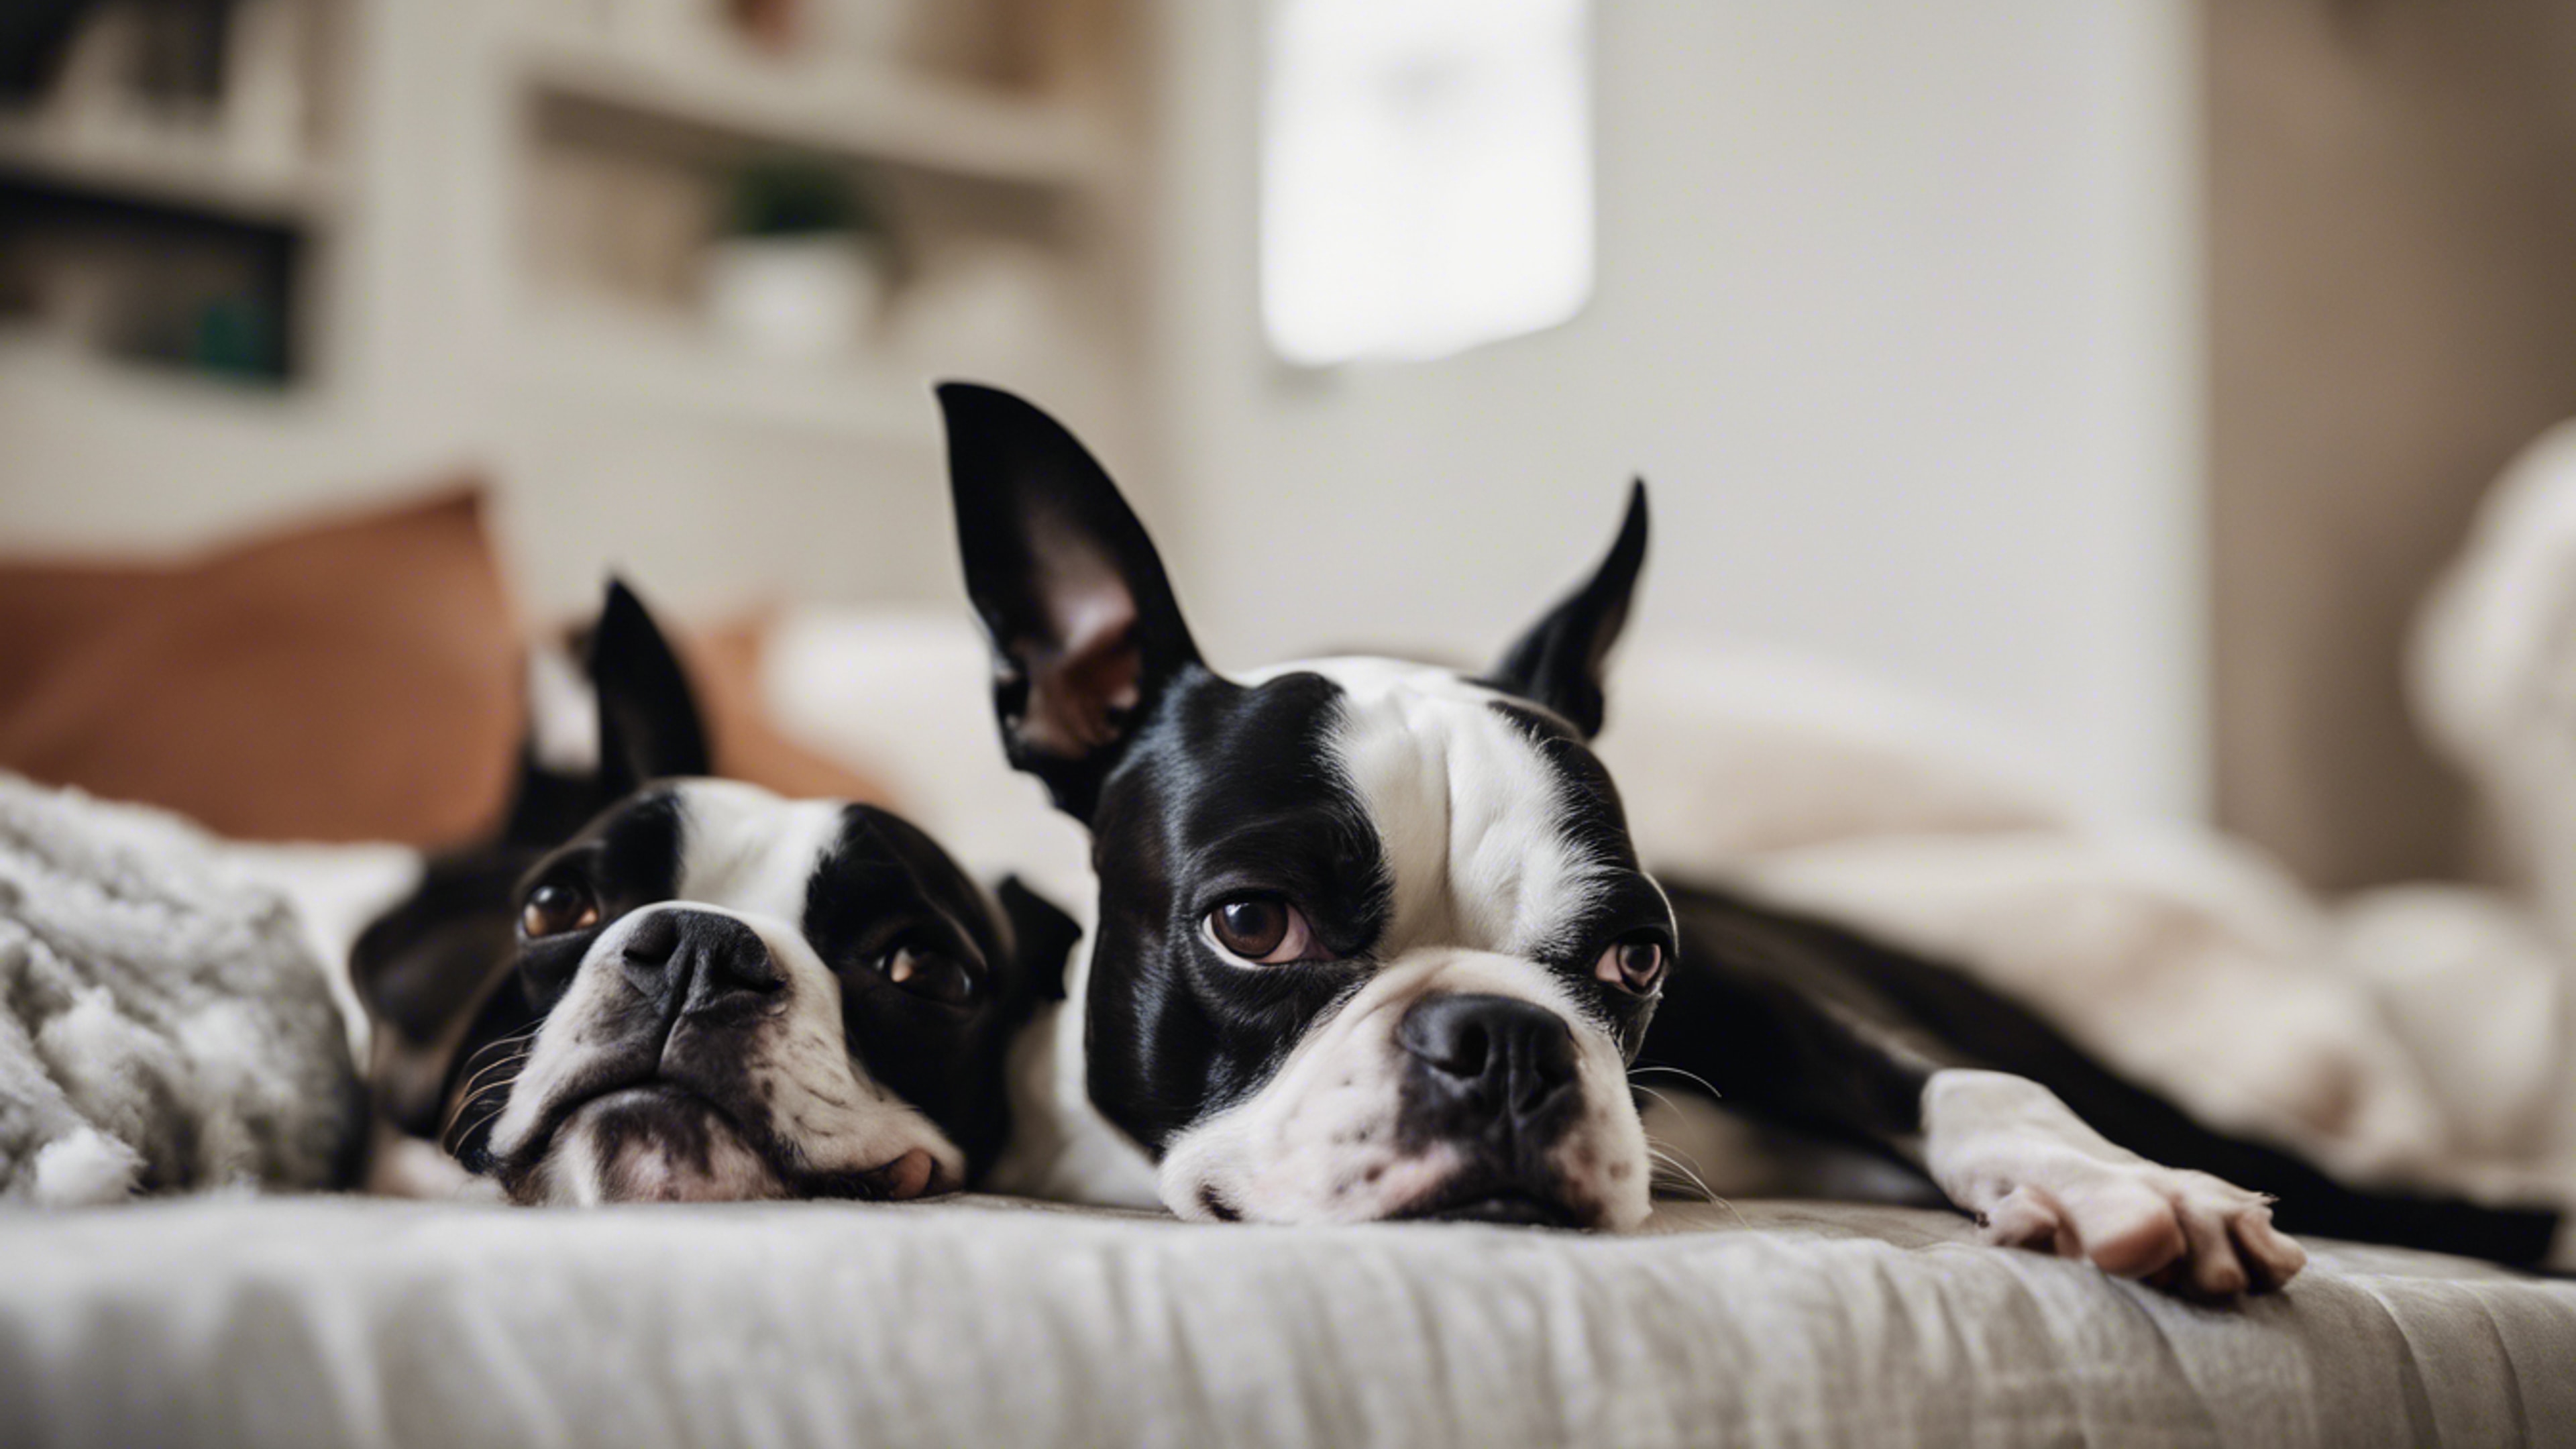 Two Boston Terriers laying comfortably on their sides, dozing away the afternoon in a suburban home. ផ្ទាំង​រូបភាព[f1fad920e9554f308ac1]